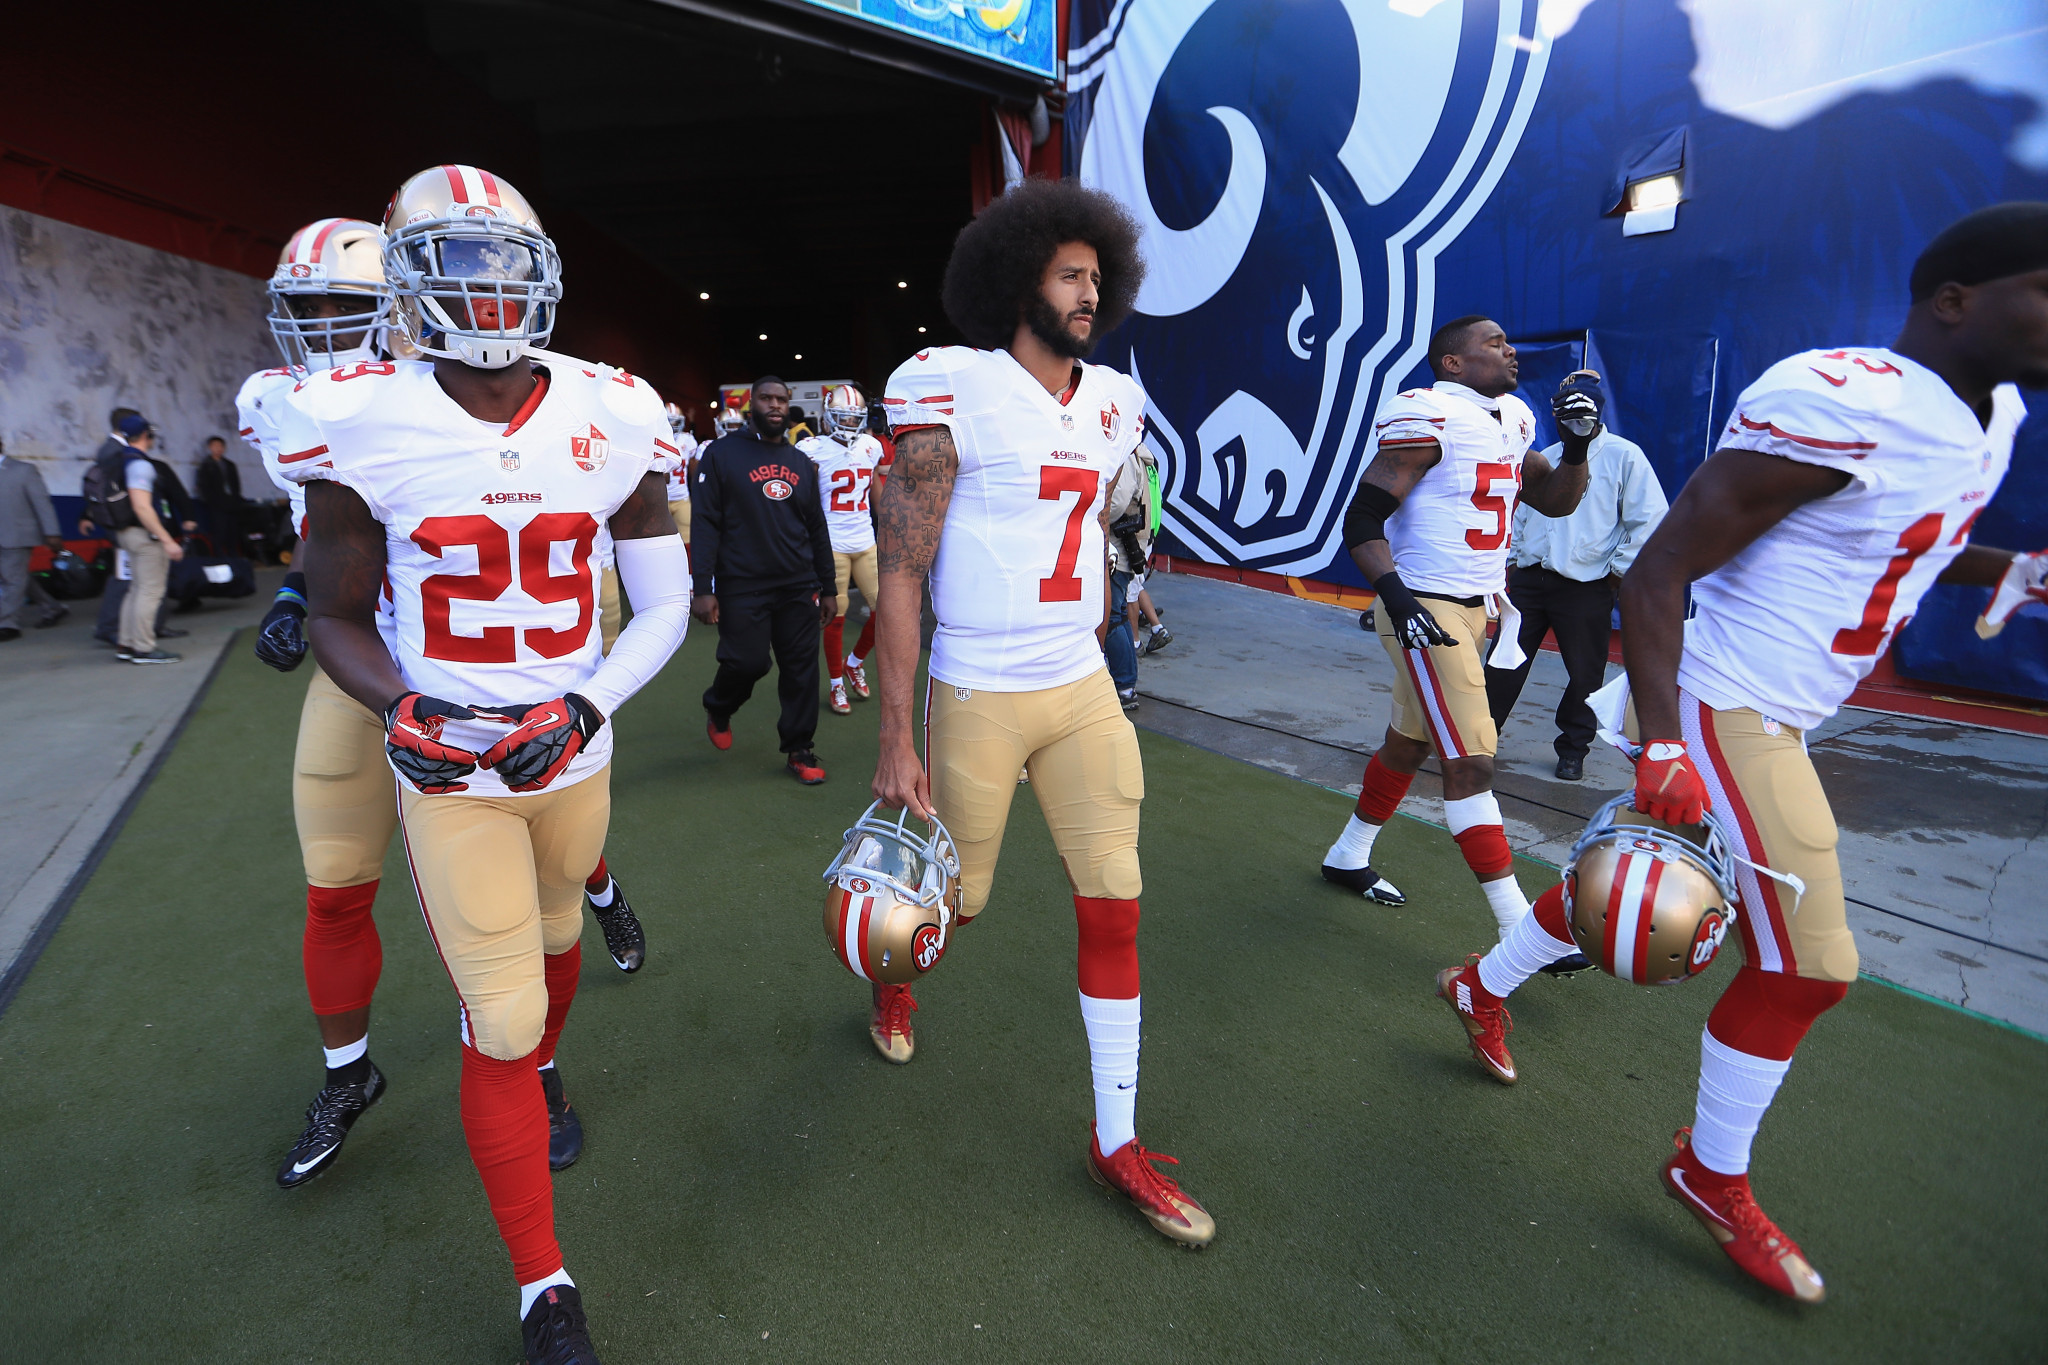 Colin Kaepernick, centre, began a protest on perceived racial injustice last year, but has since found himself without a team ©Getty Images